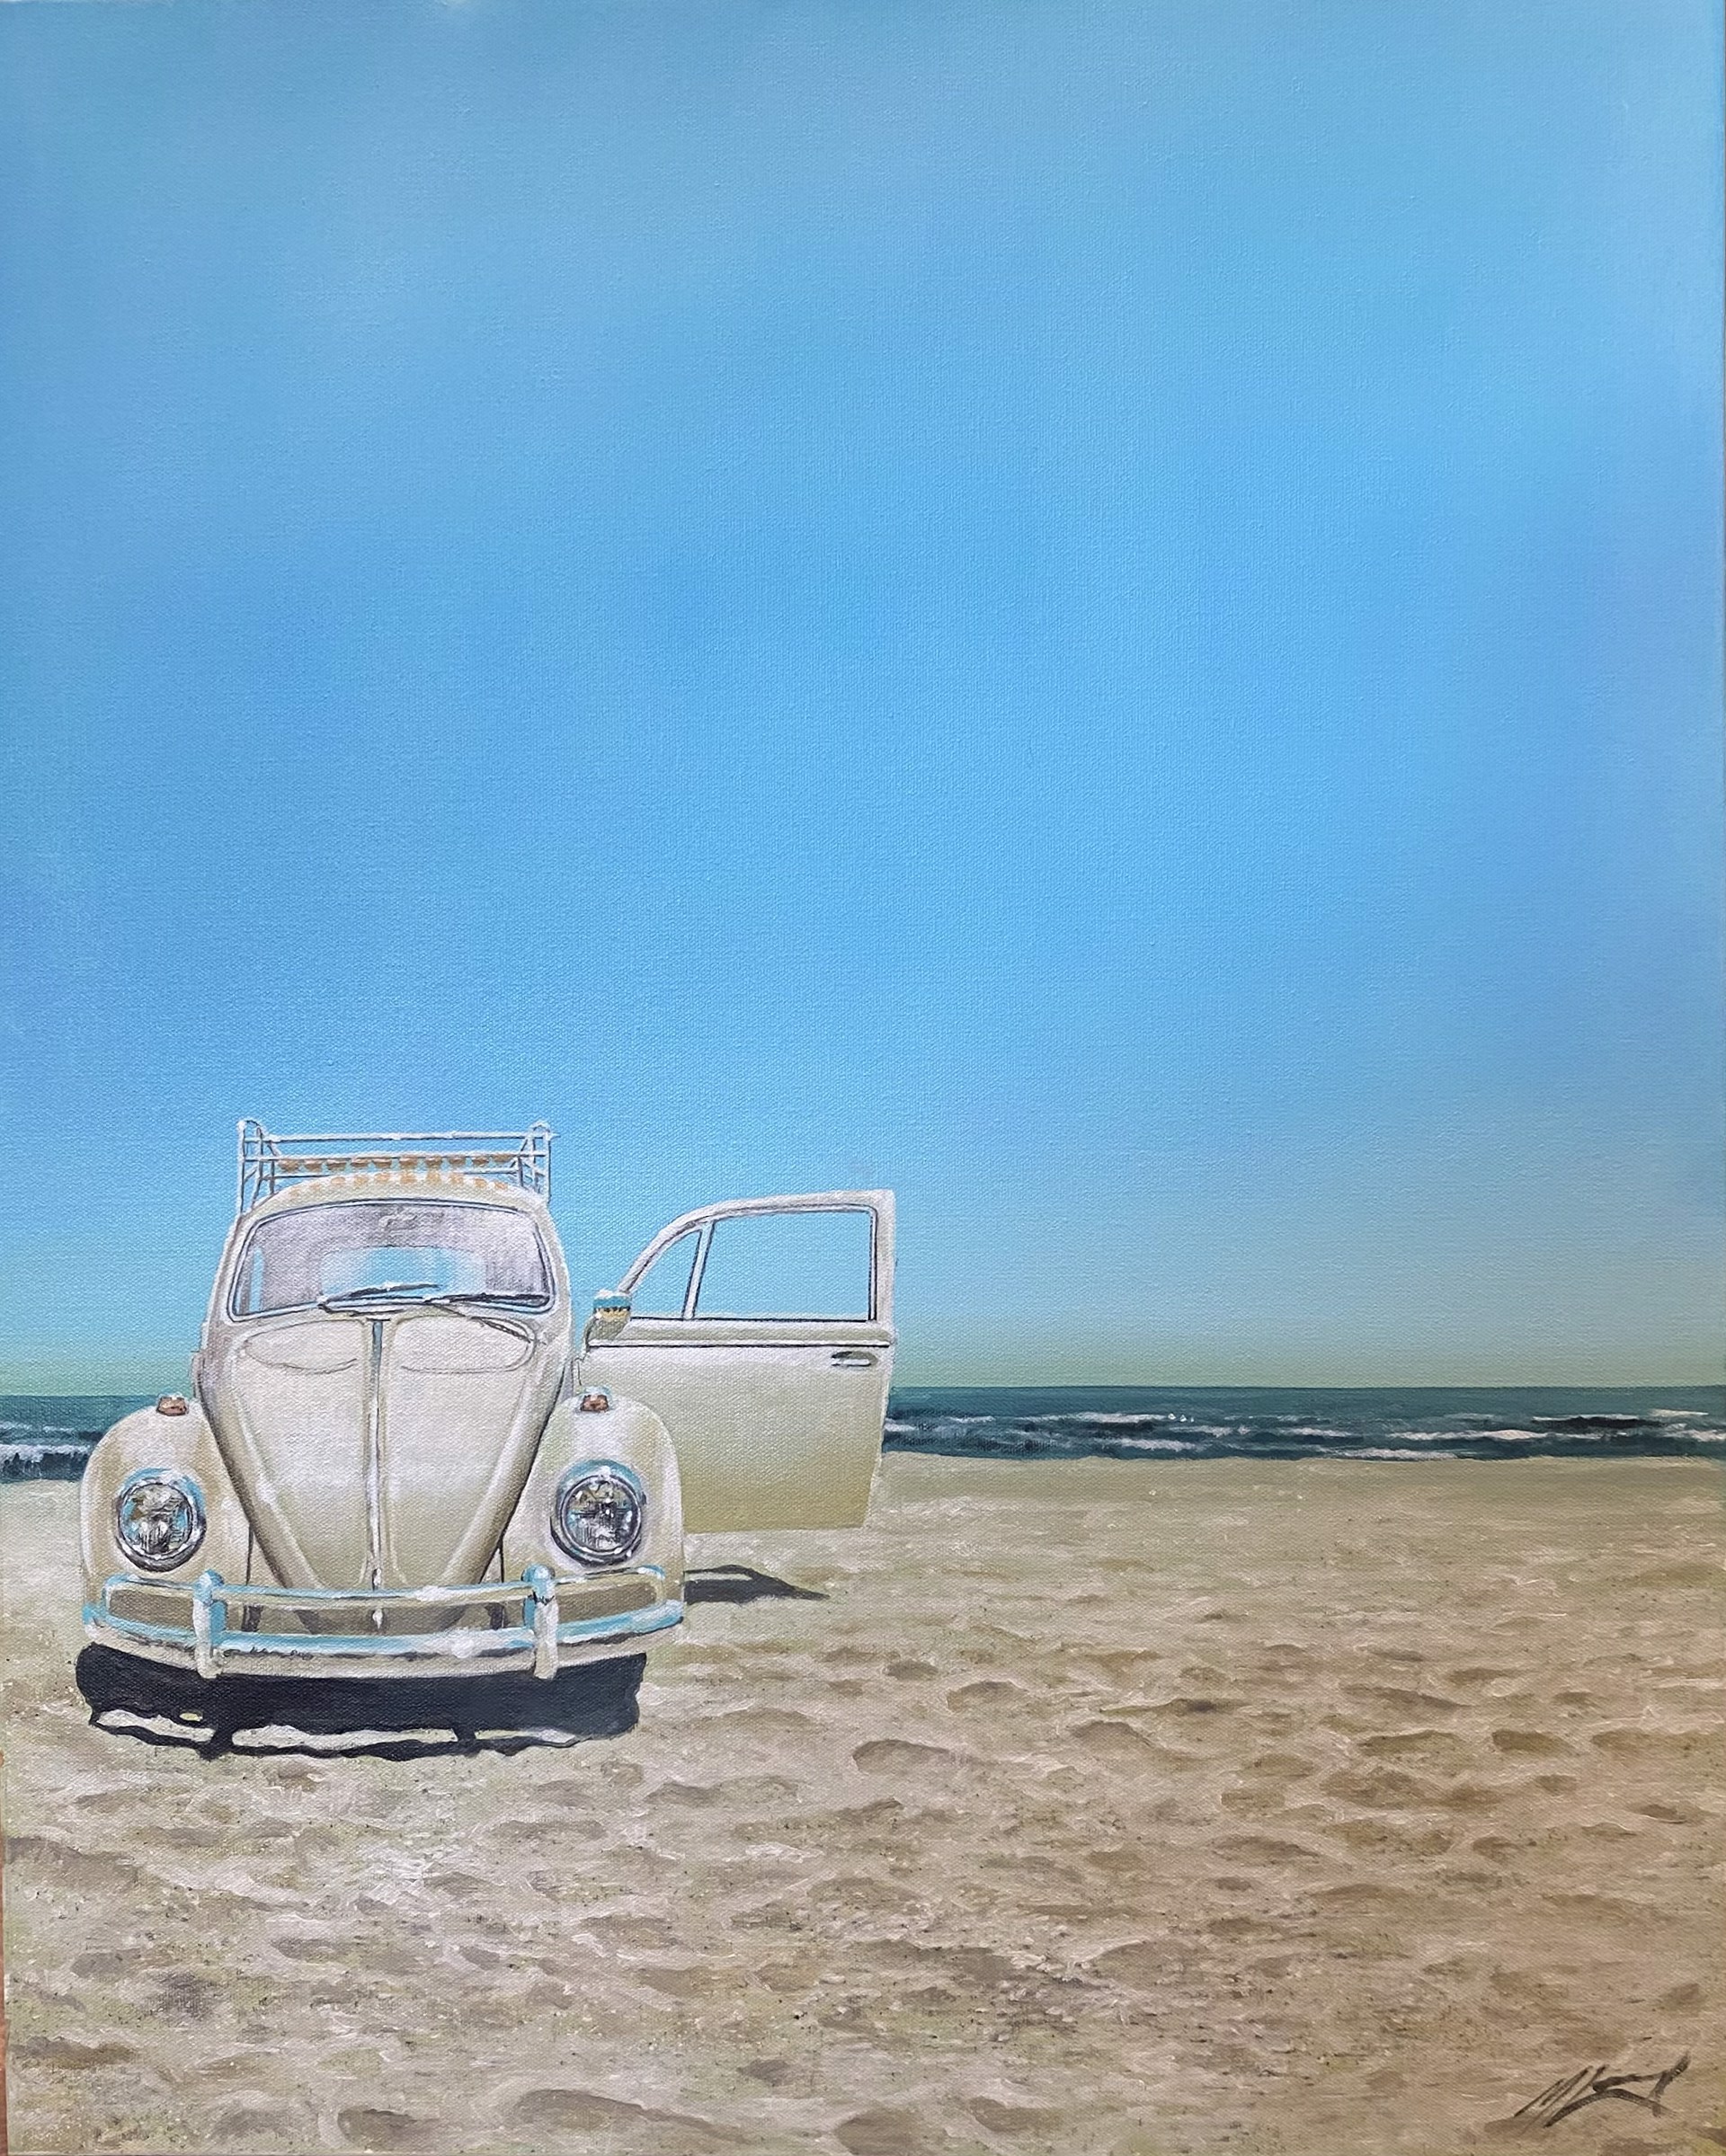 Bug on the Beach II by Mike Liversage